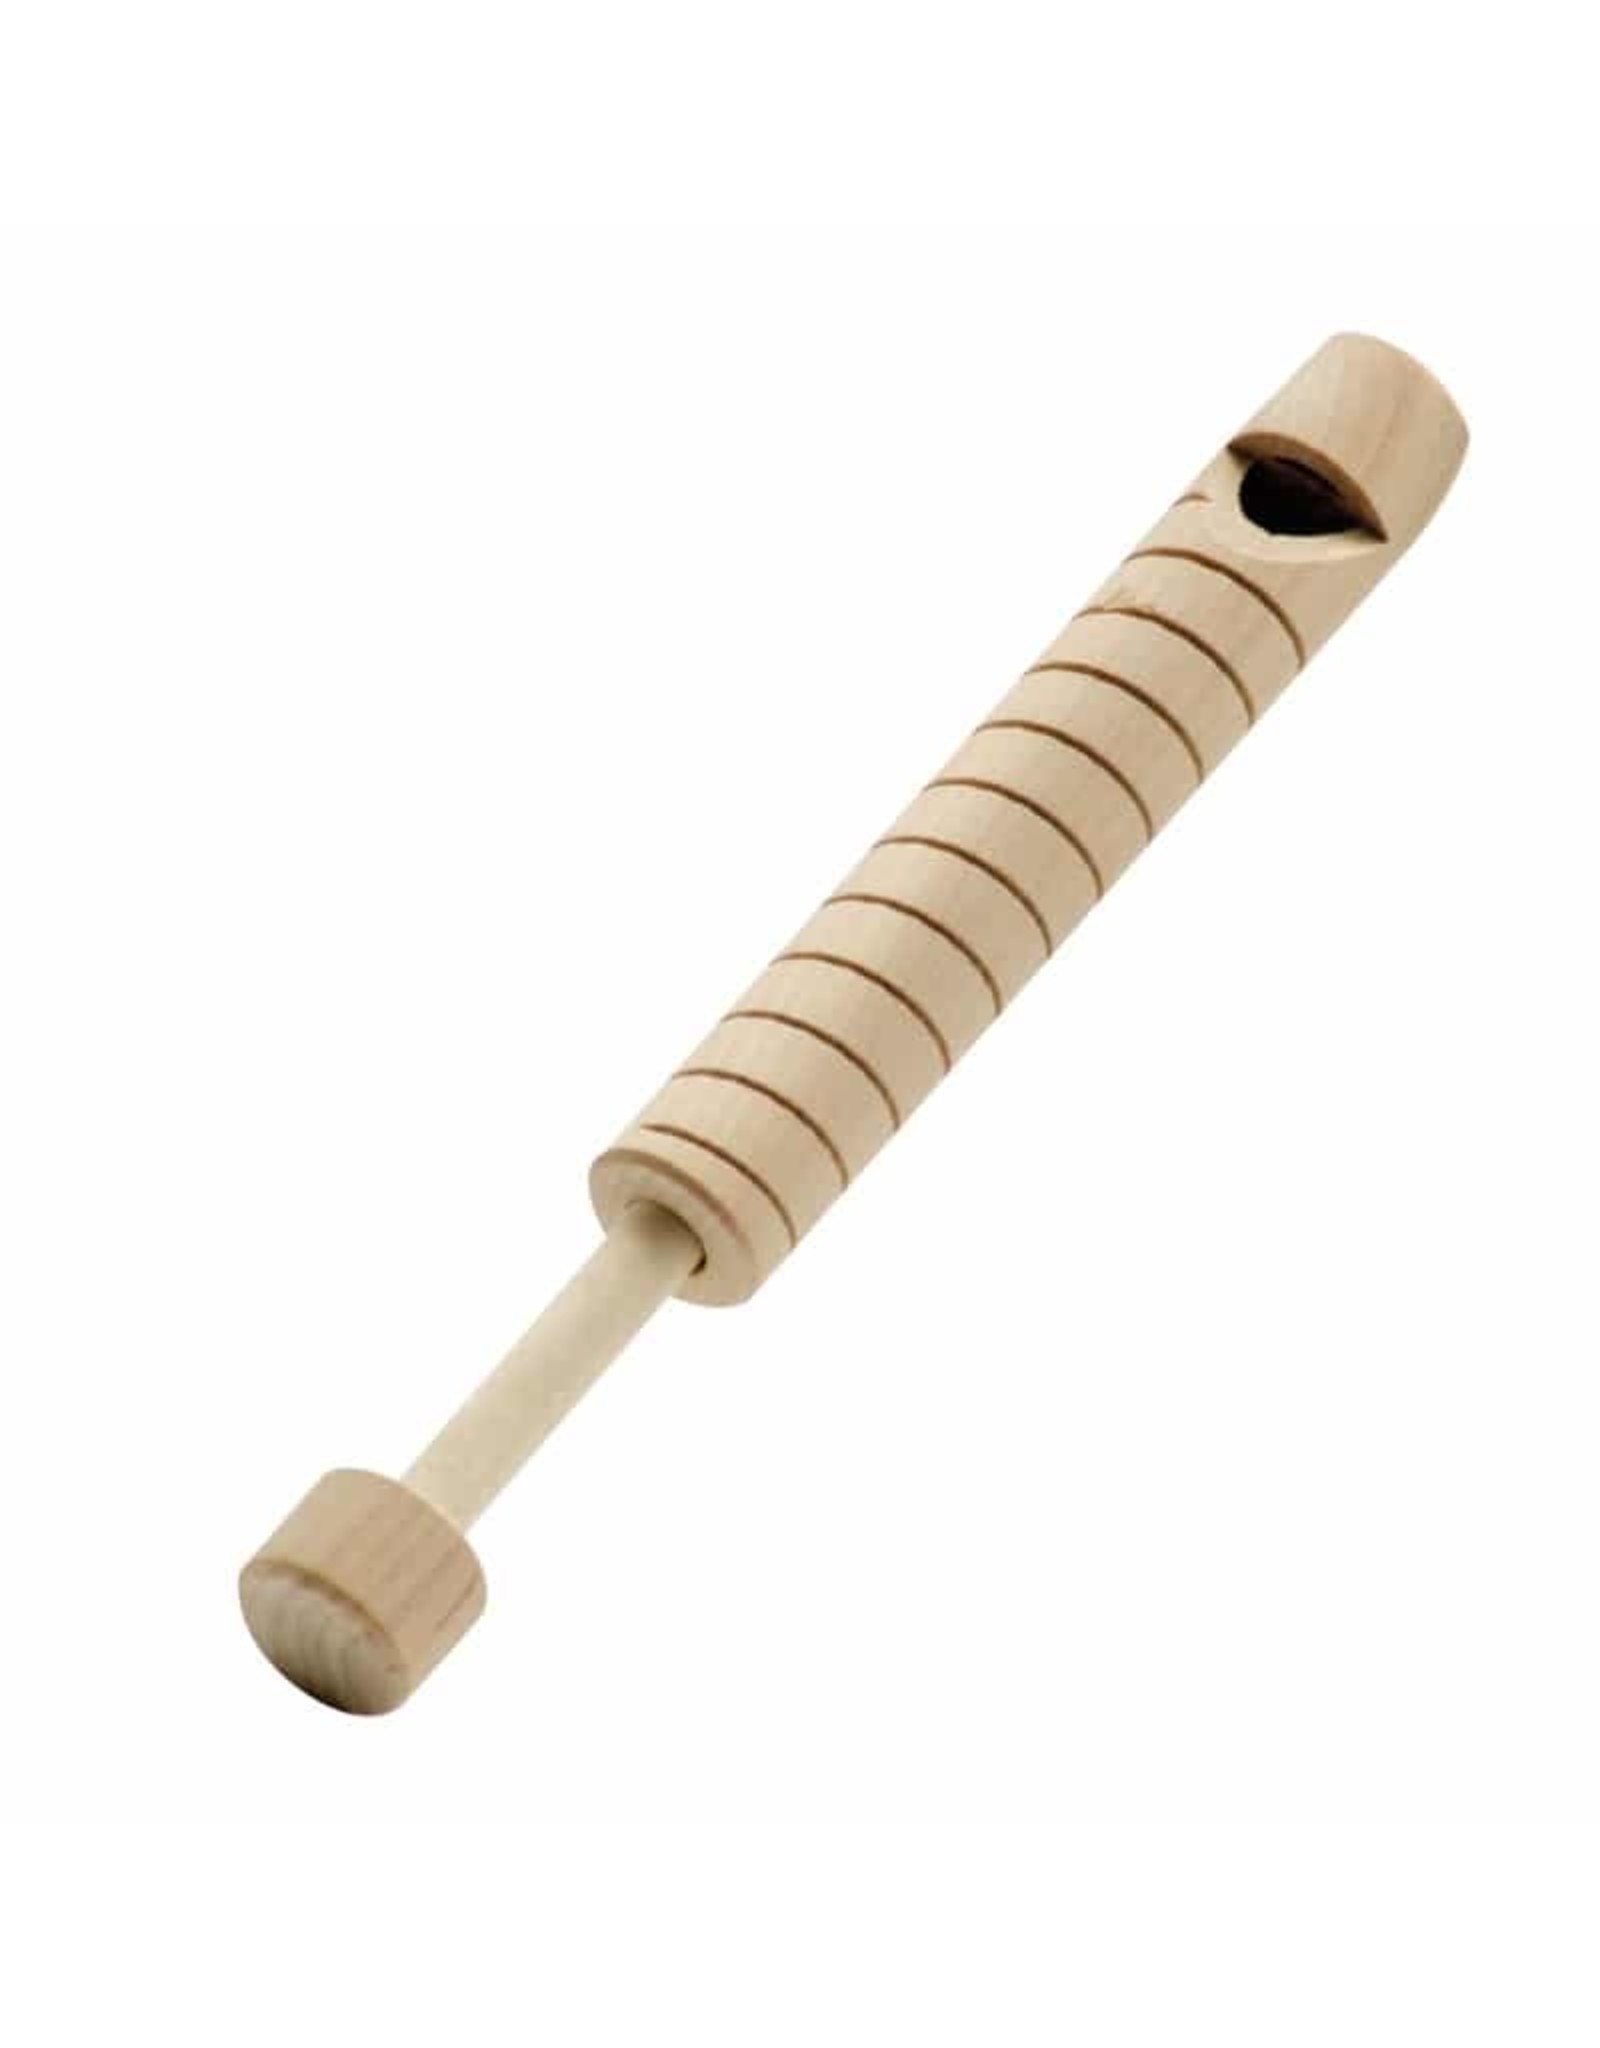 Schylling Slide Whistle